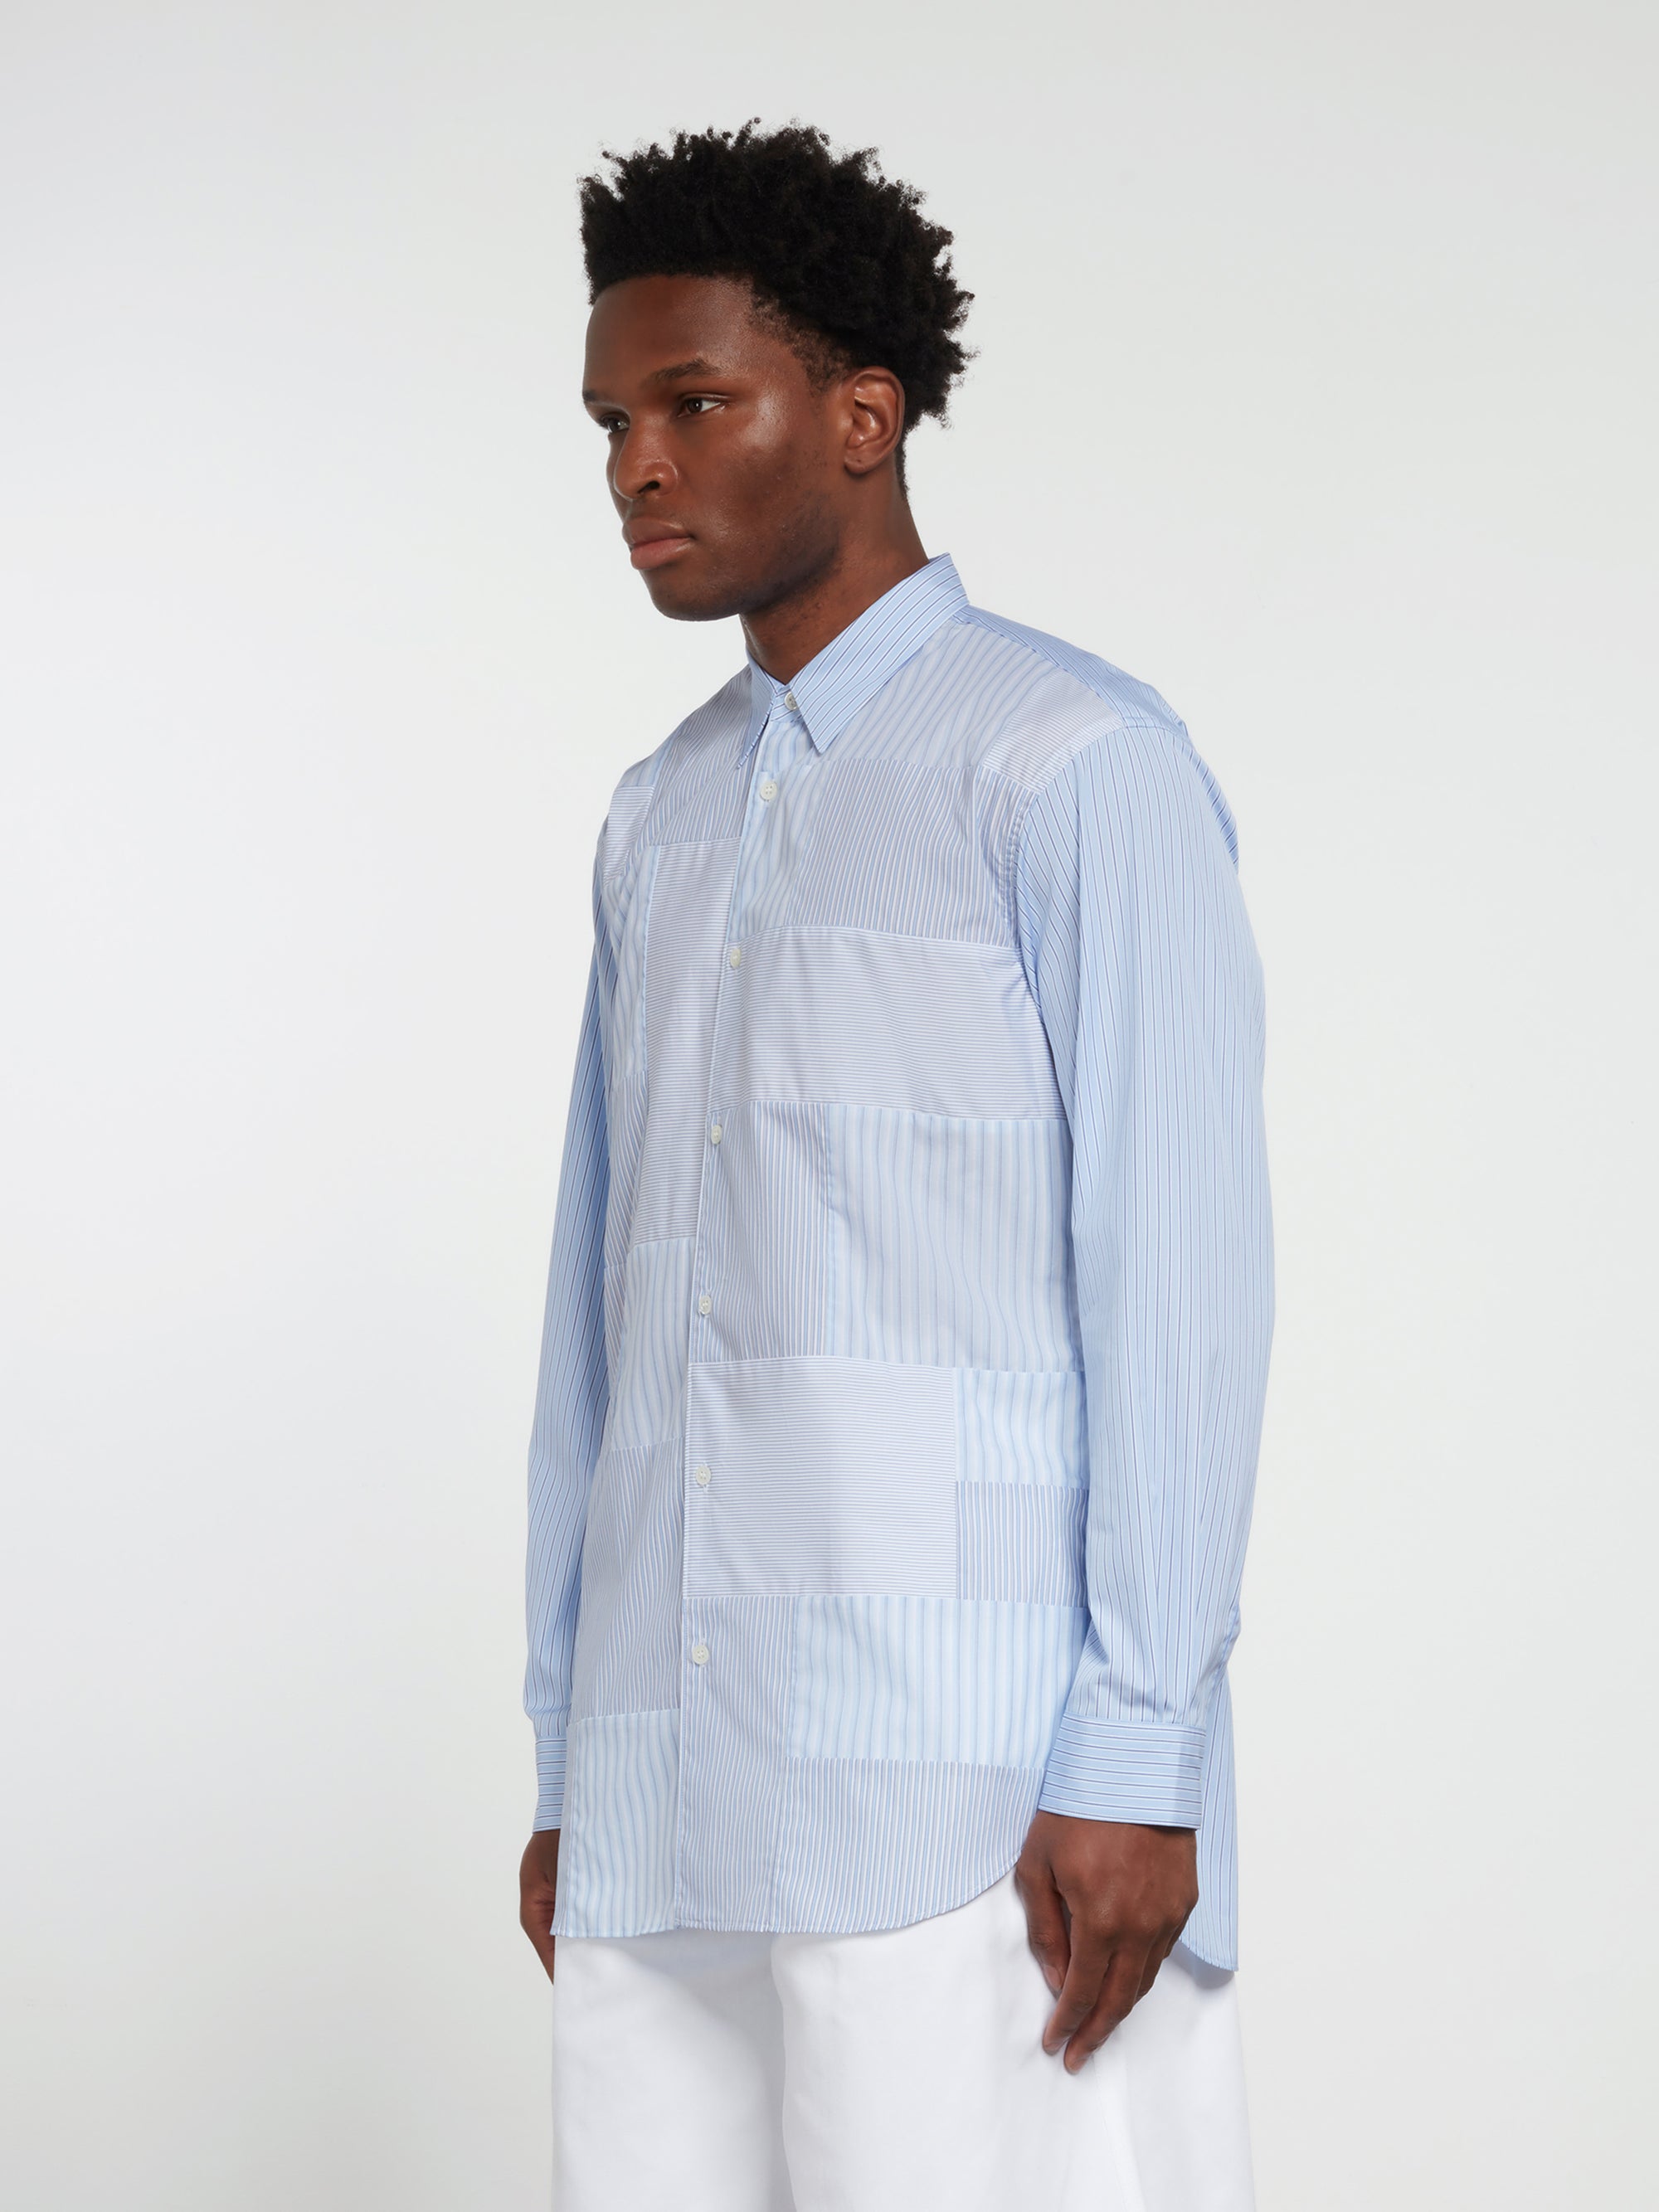 CDG SHIRT FOREVER - Classic Fit Patchwork Stripe Shirt|Dover Street ...